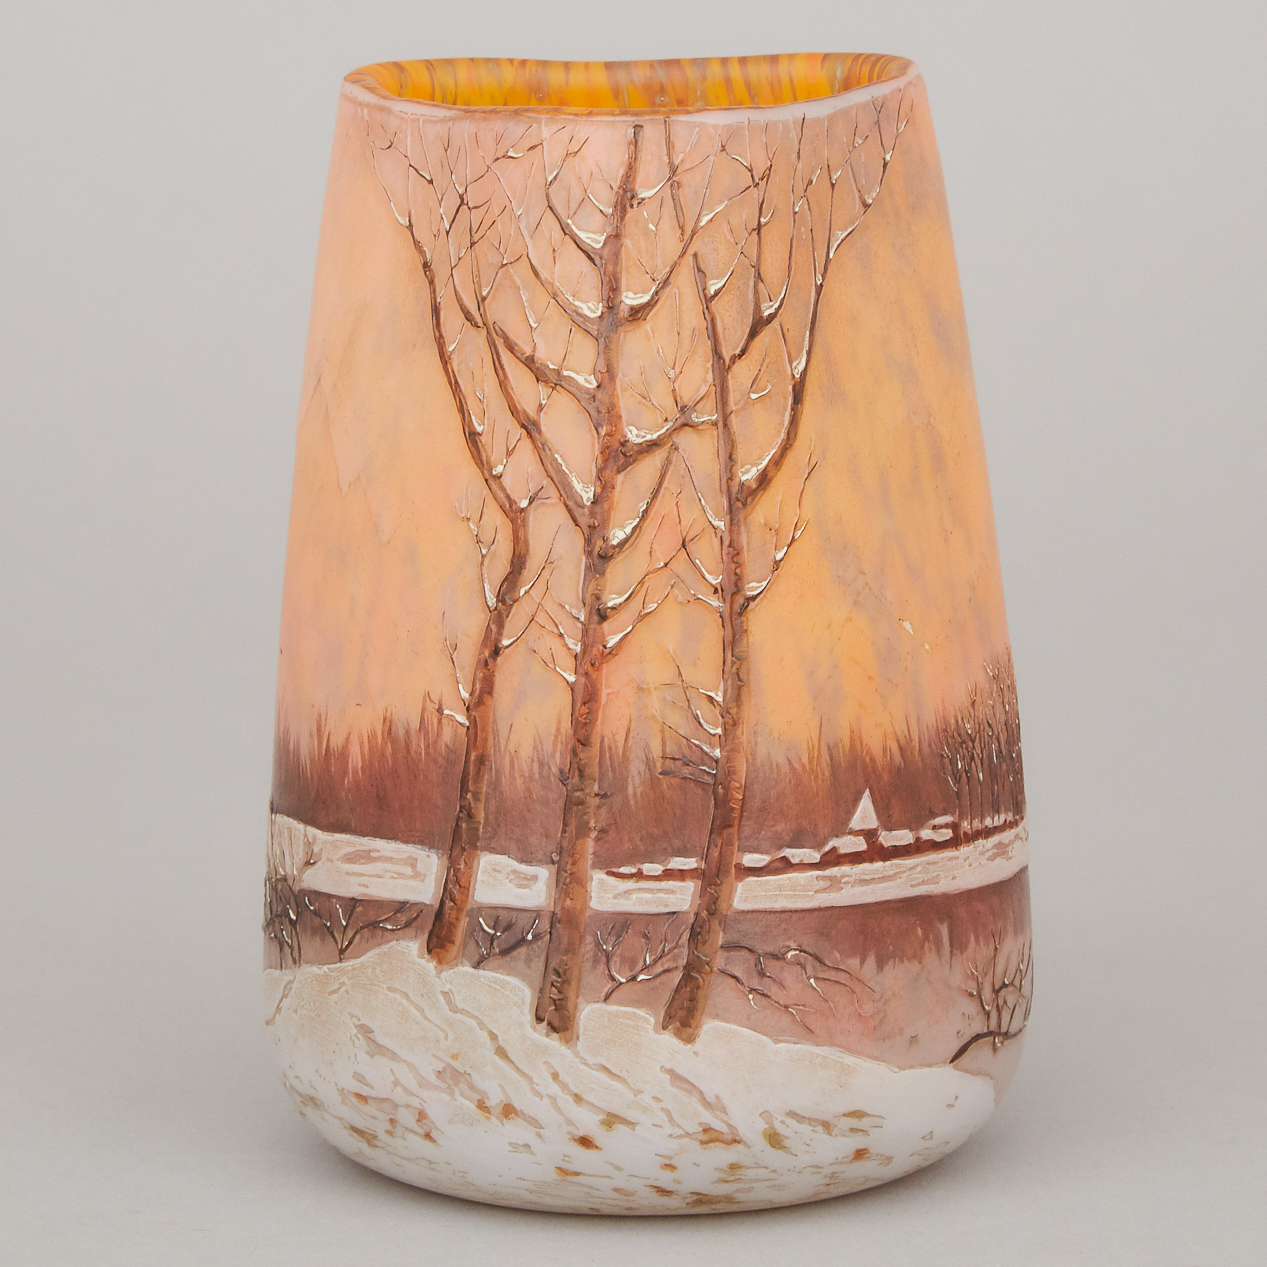 Legras Enameled Cameo Glass Winter Landscape Vase, early 20th century